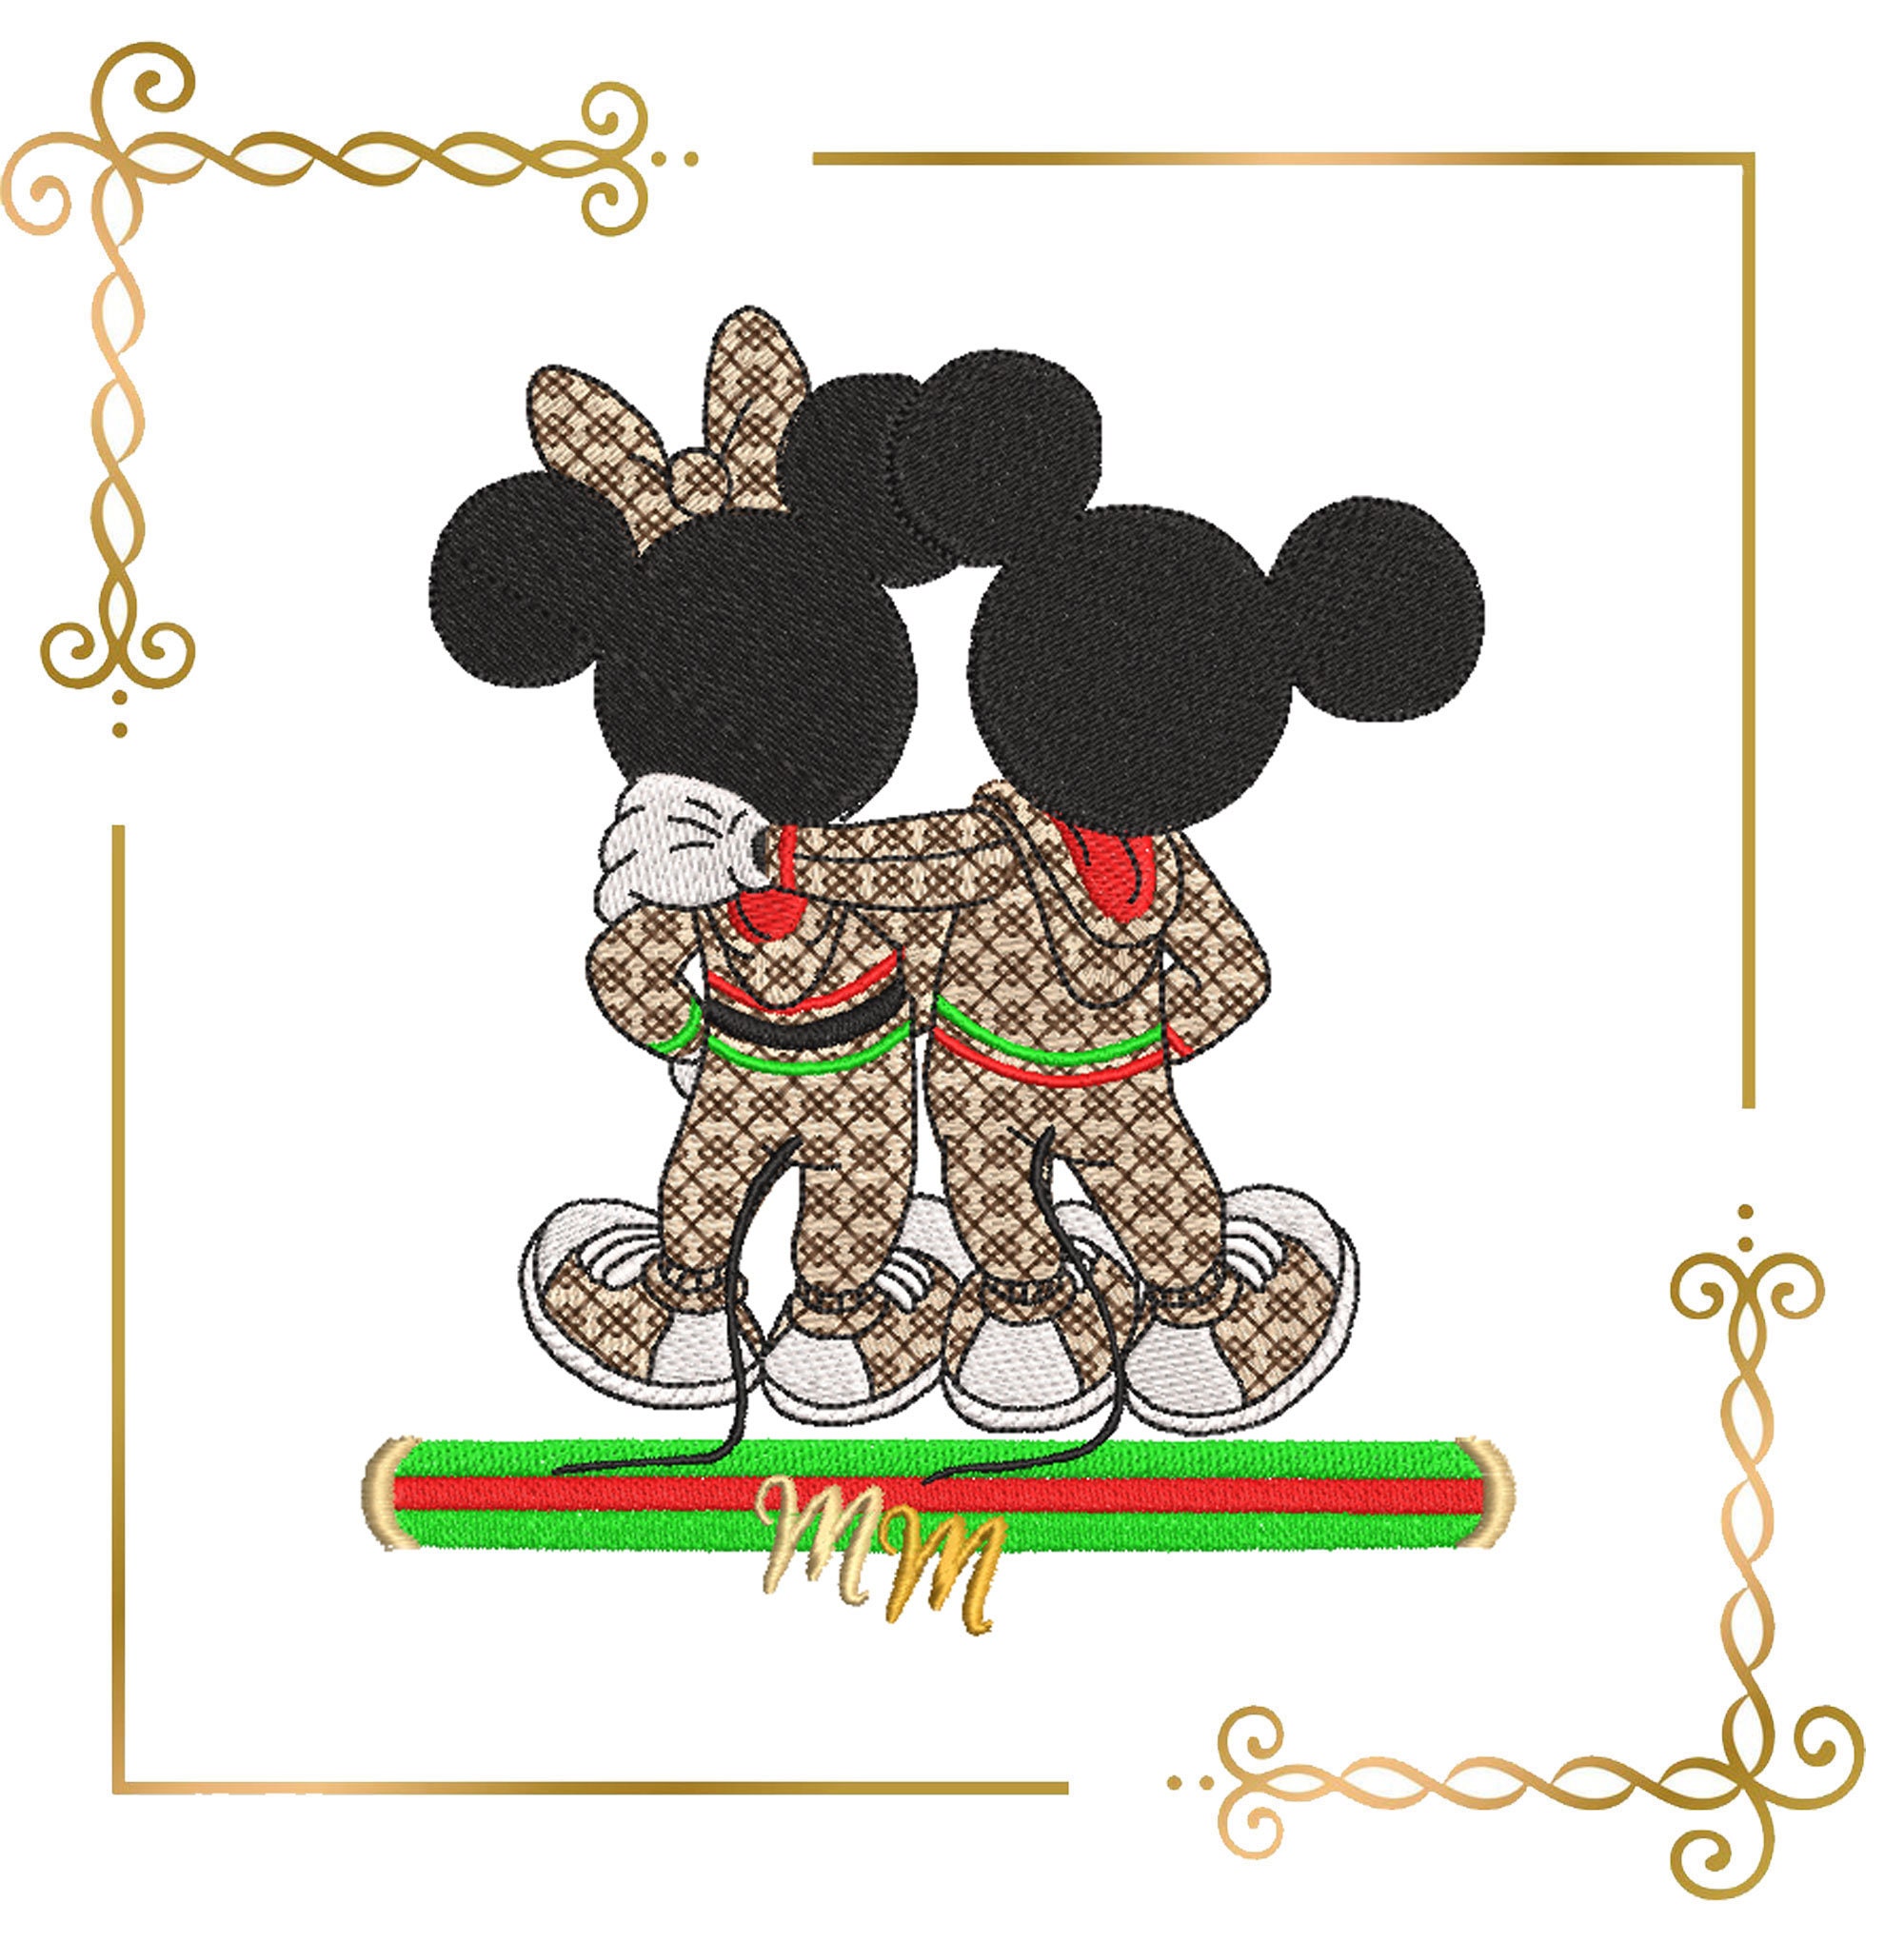 Gucci Mickey And Minnie vector, Download Gucci Mickey And Minnie